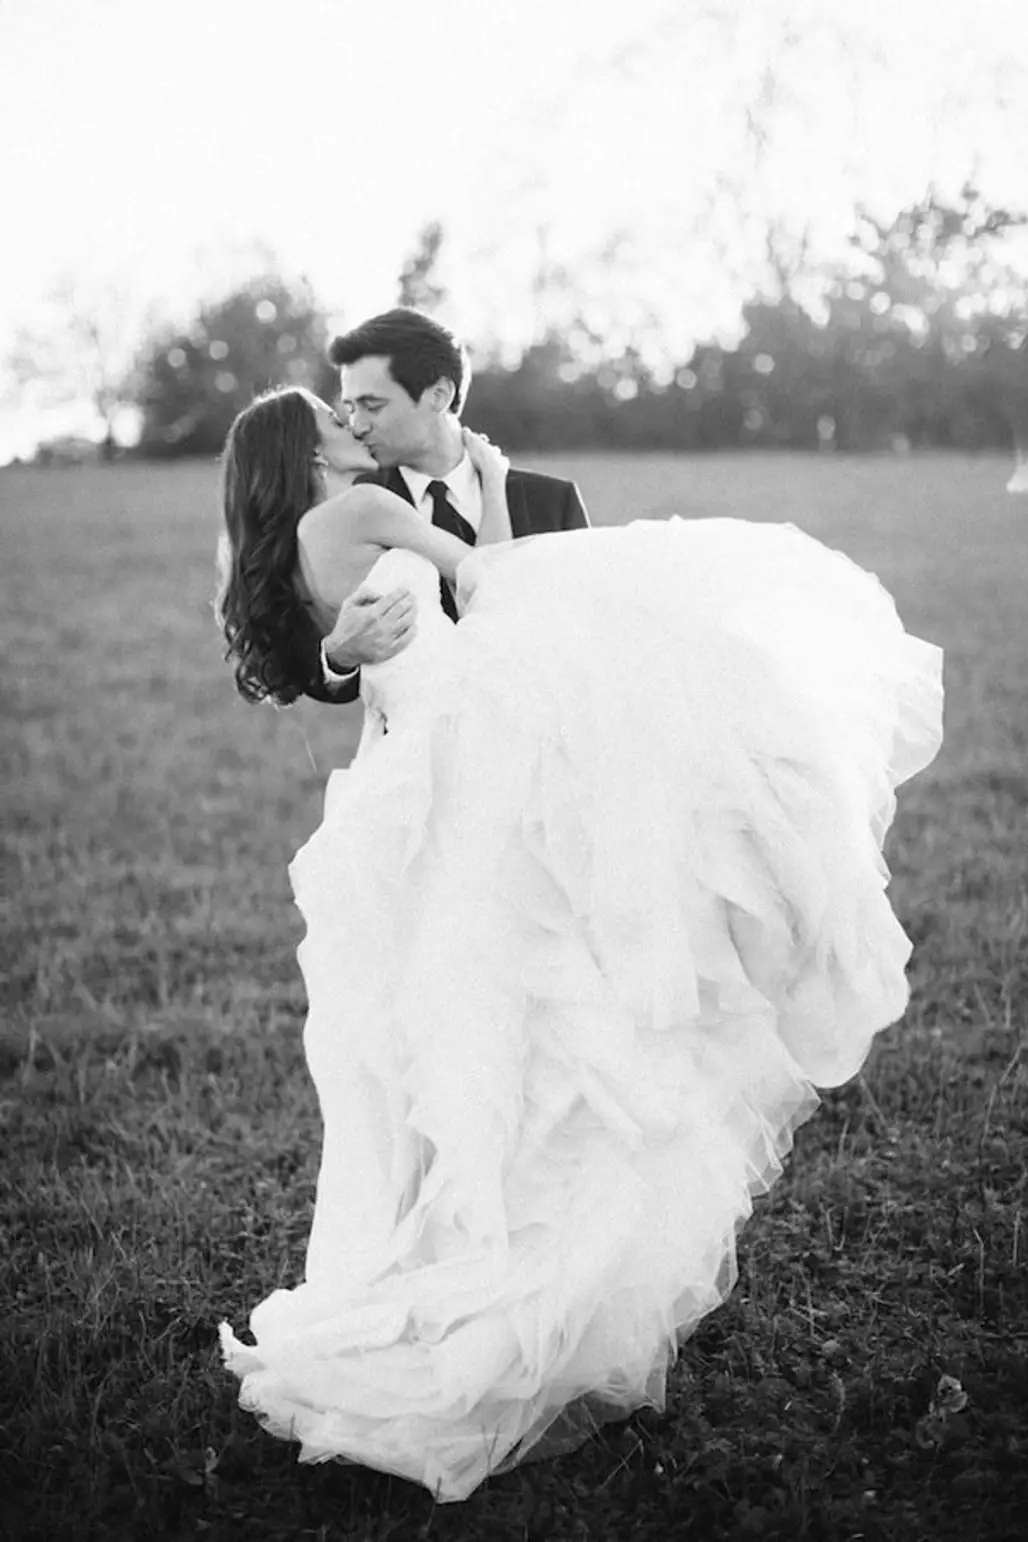 Opt for Black and White Wedding Photos